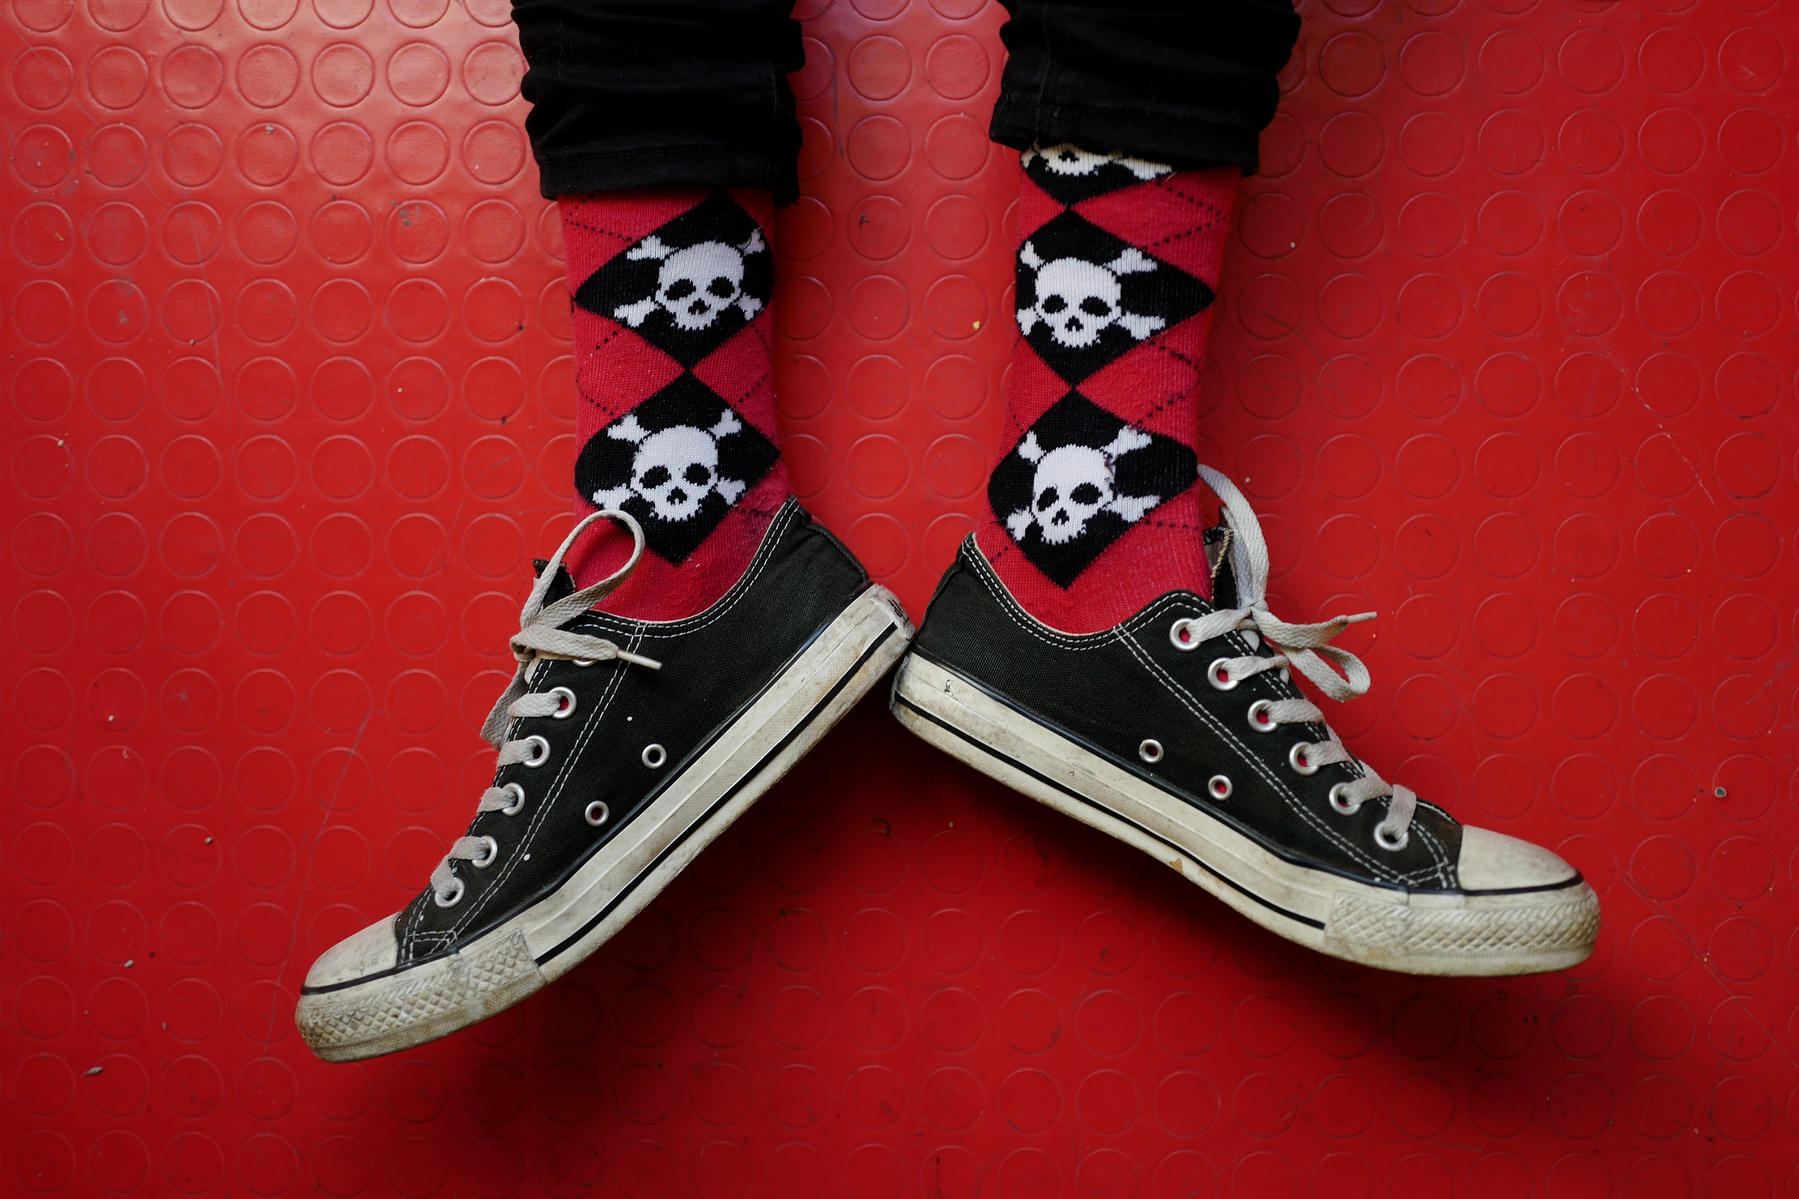 Looking down on a pair of legs with sneakers, red floor, red socks with skulls.